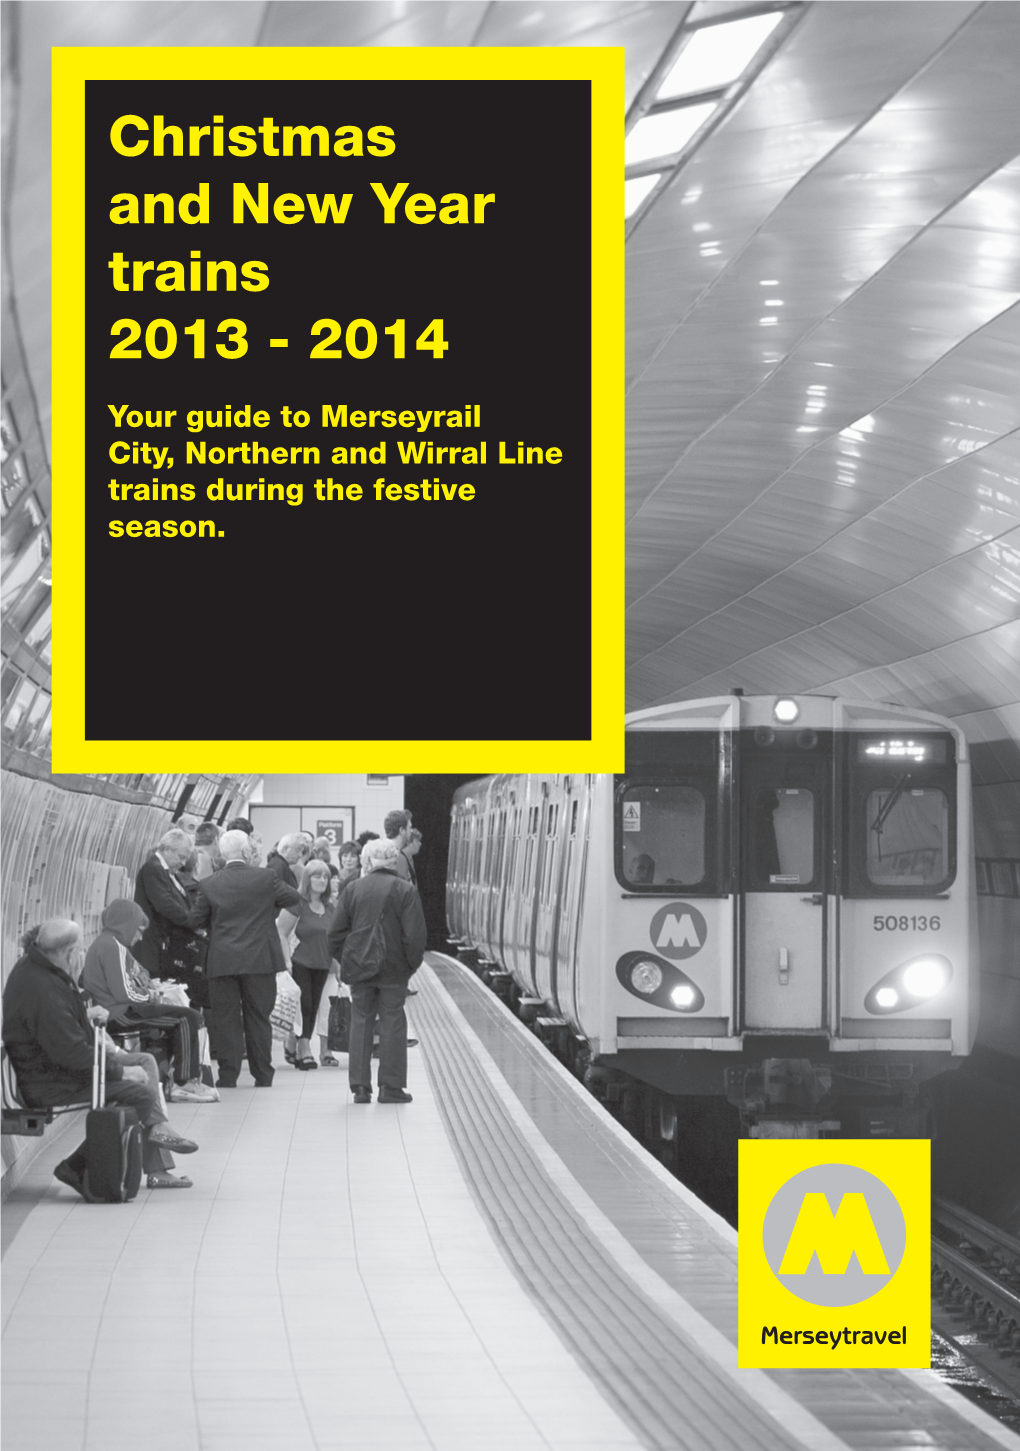 Merseyrail Leaflet 2013-2014.Qxp 03/12/2013 15:35 Page 1